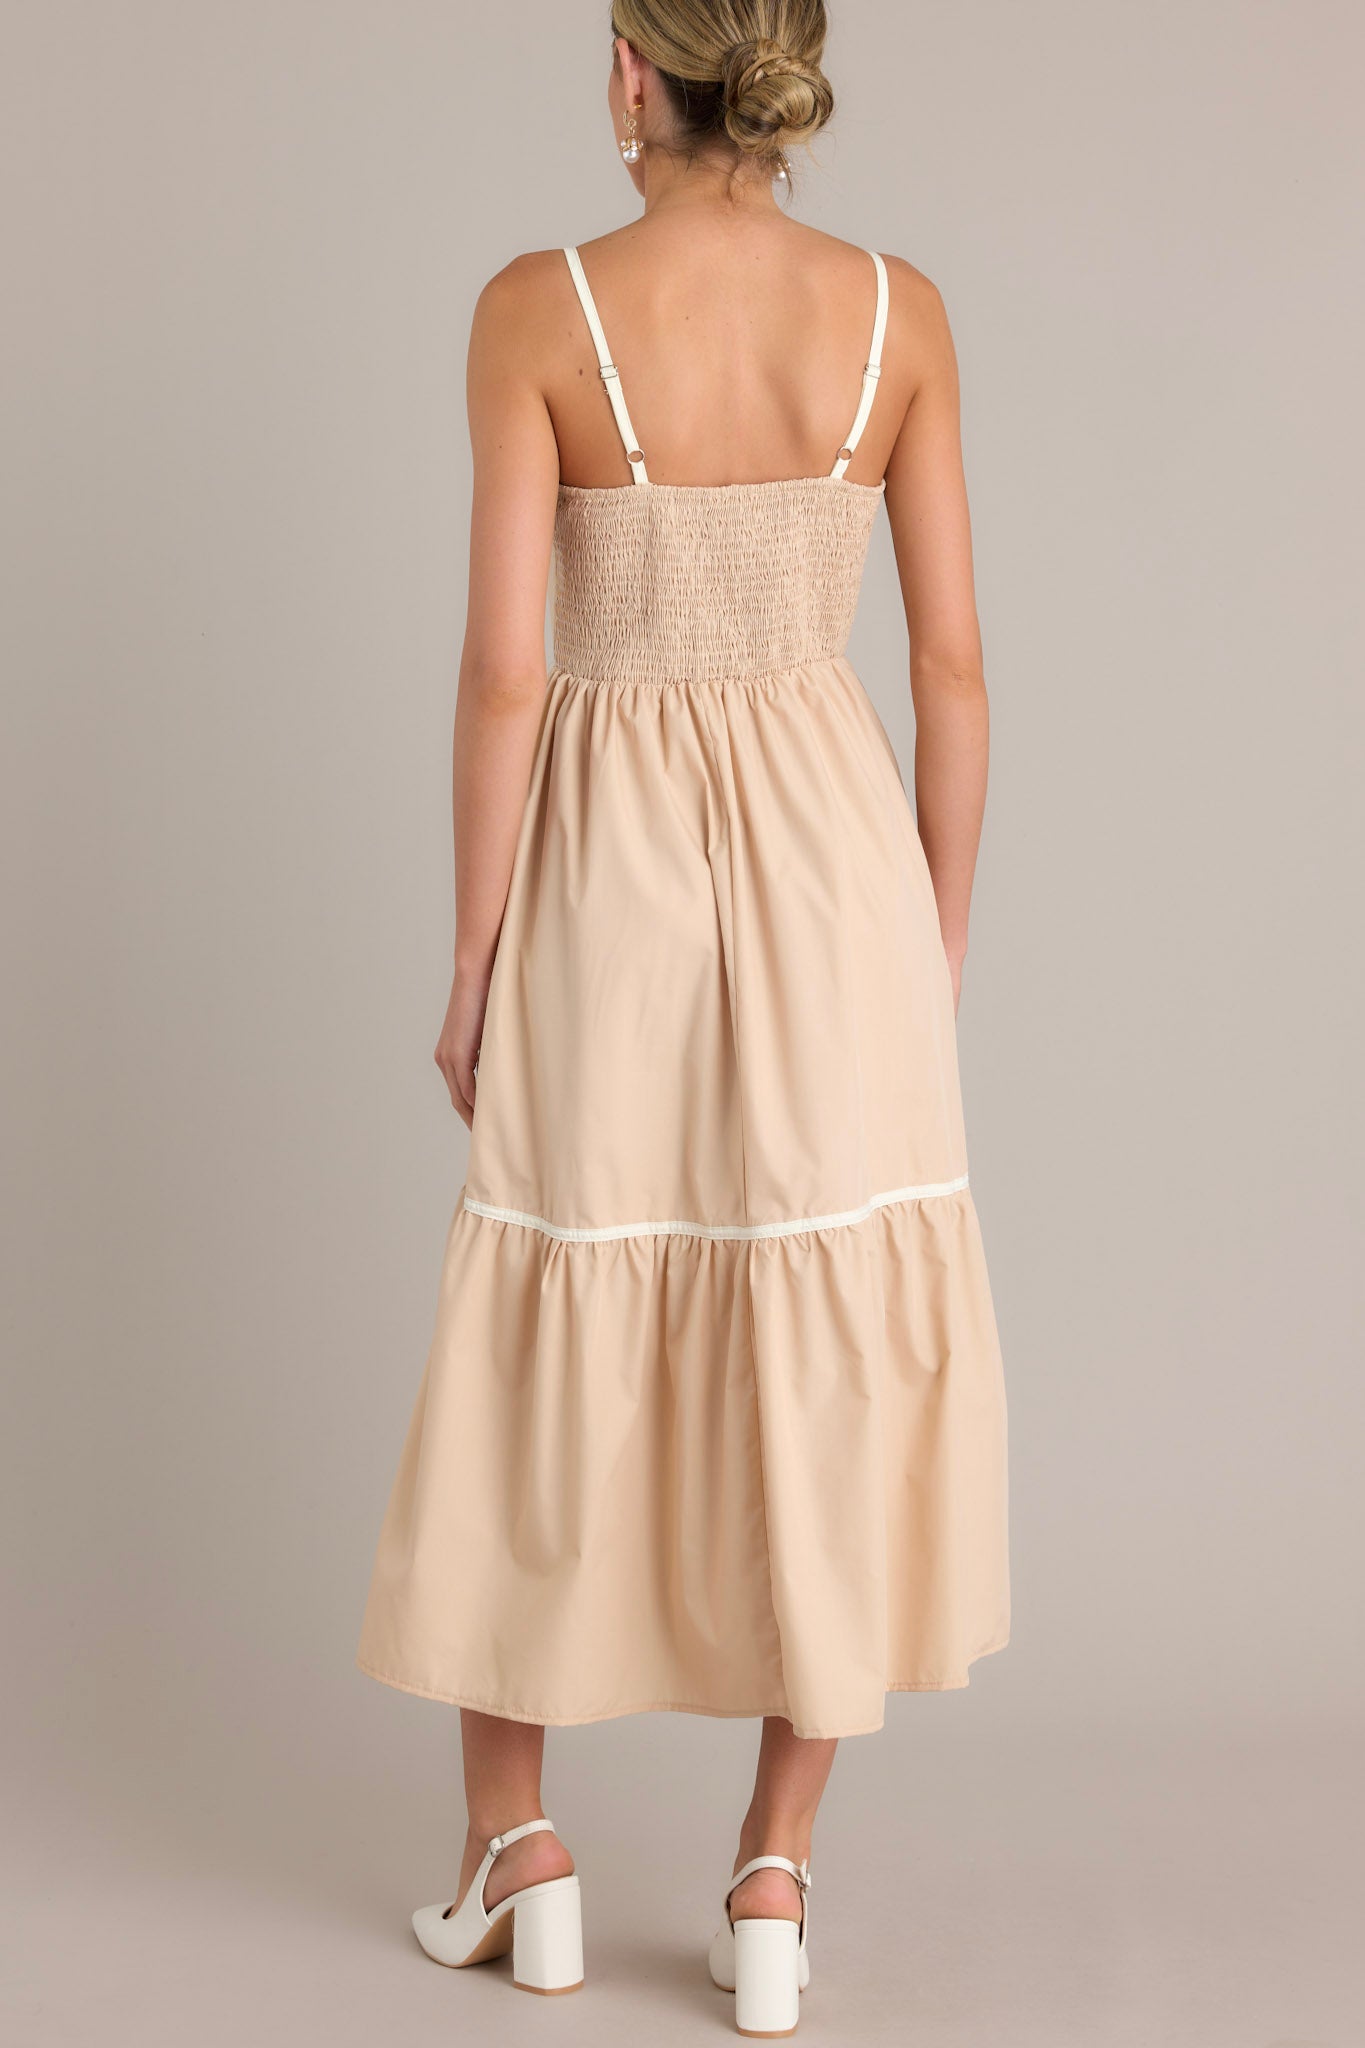 Back view of a beige maxi dress highlighting the fully smocked back, thin adjustable straps, and overall fit.